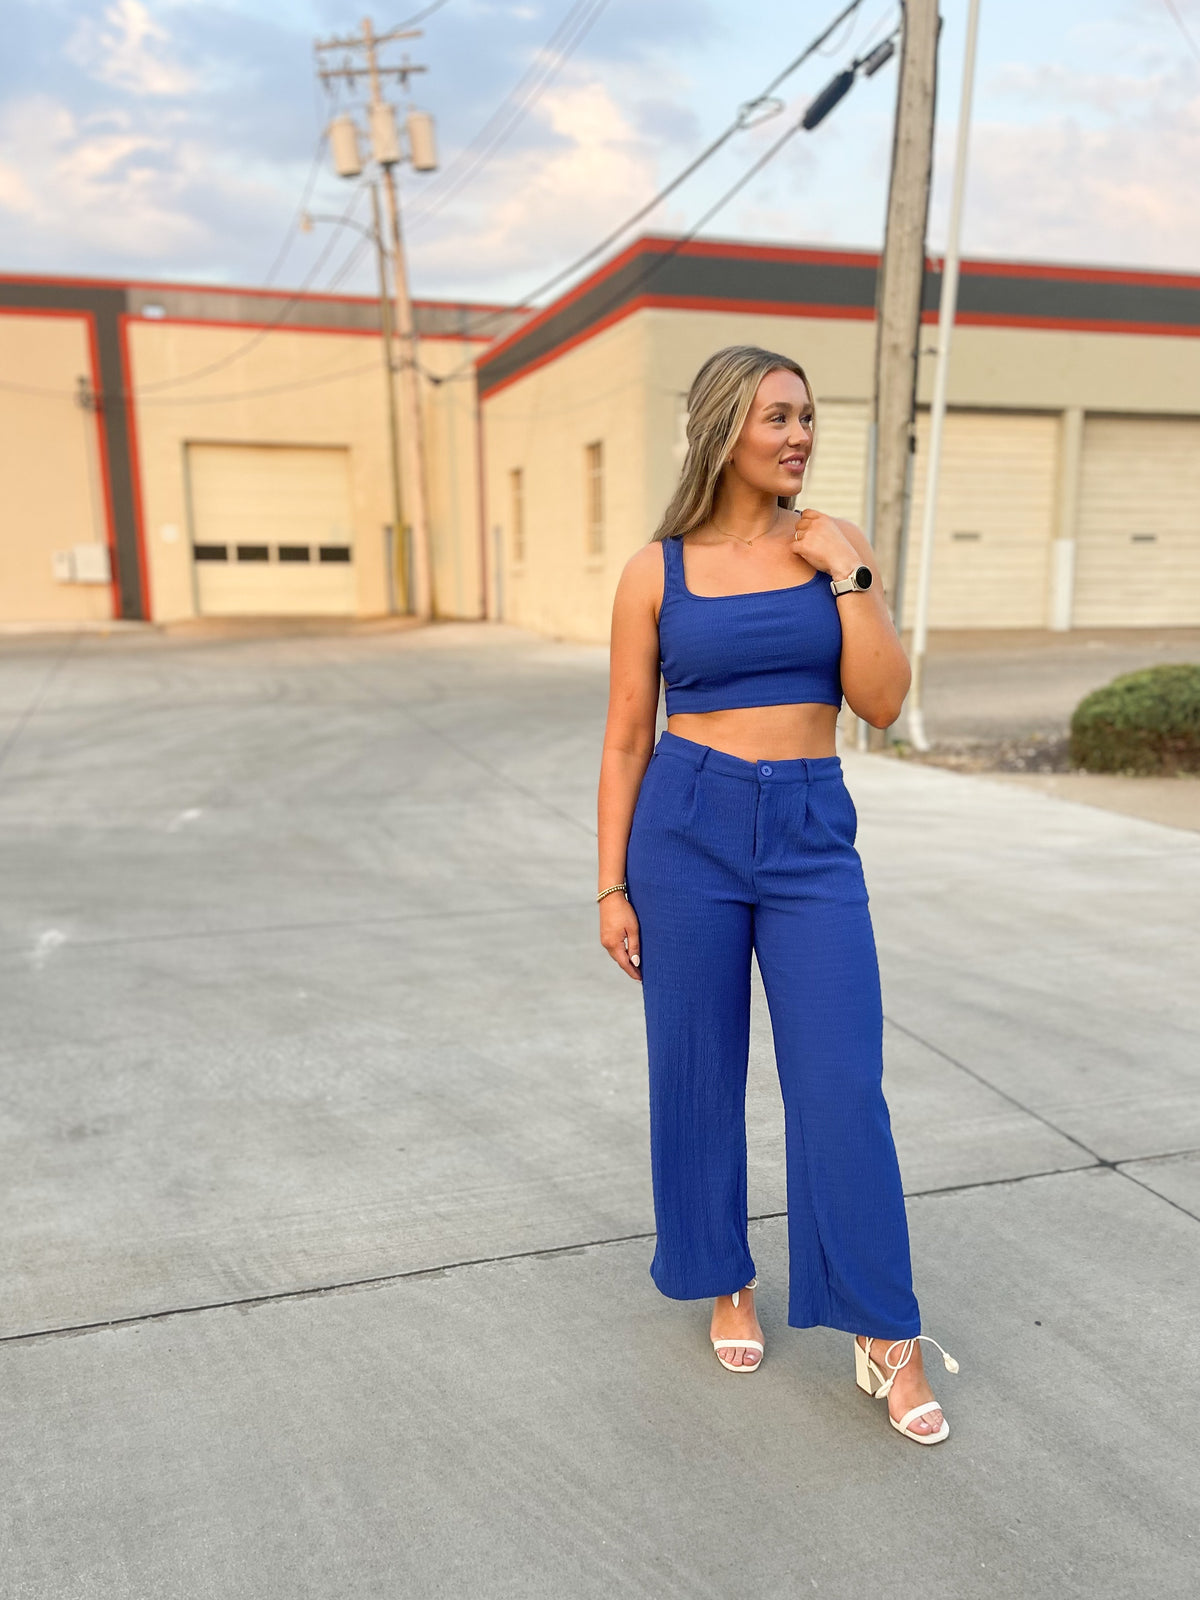 Royal Blue Pleated Trousers